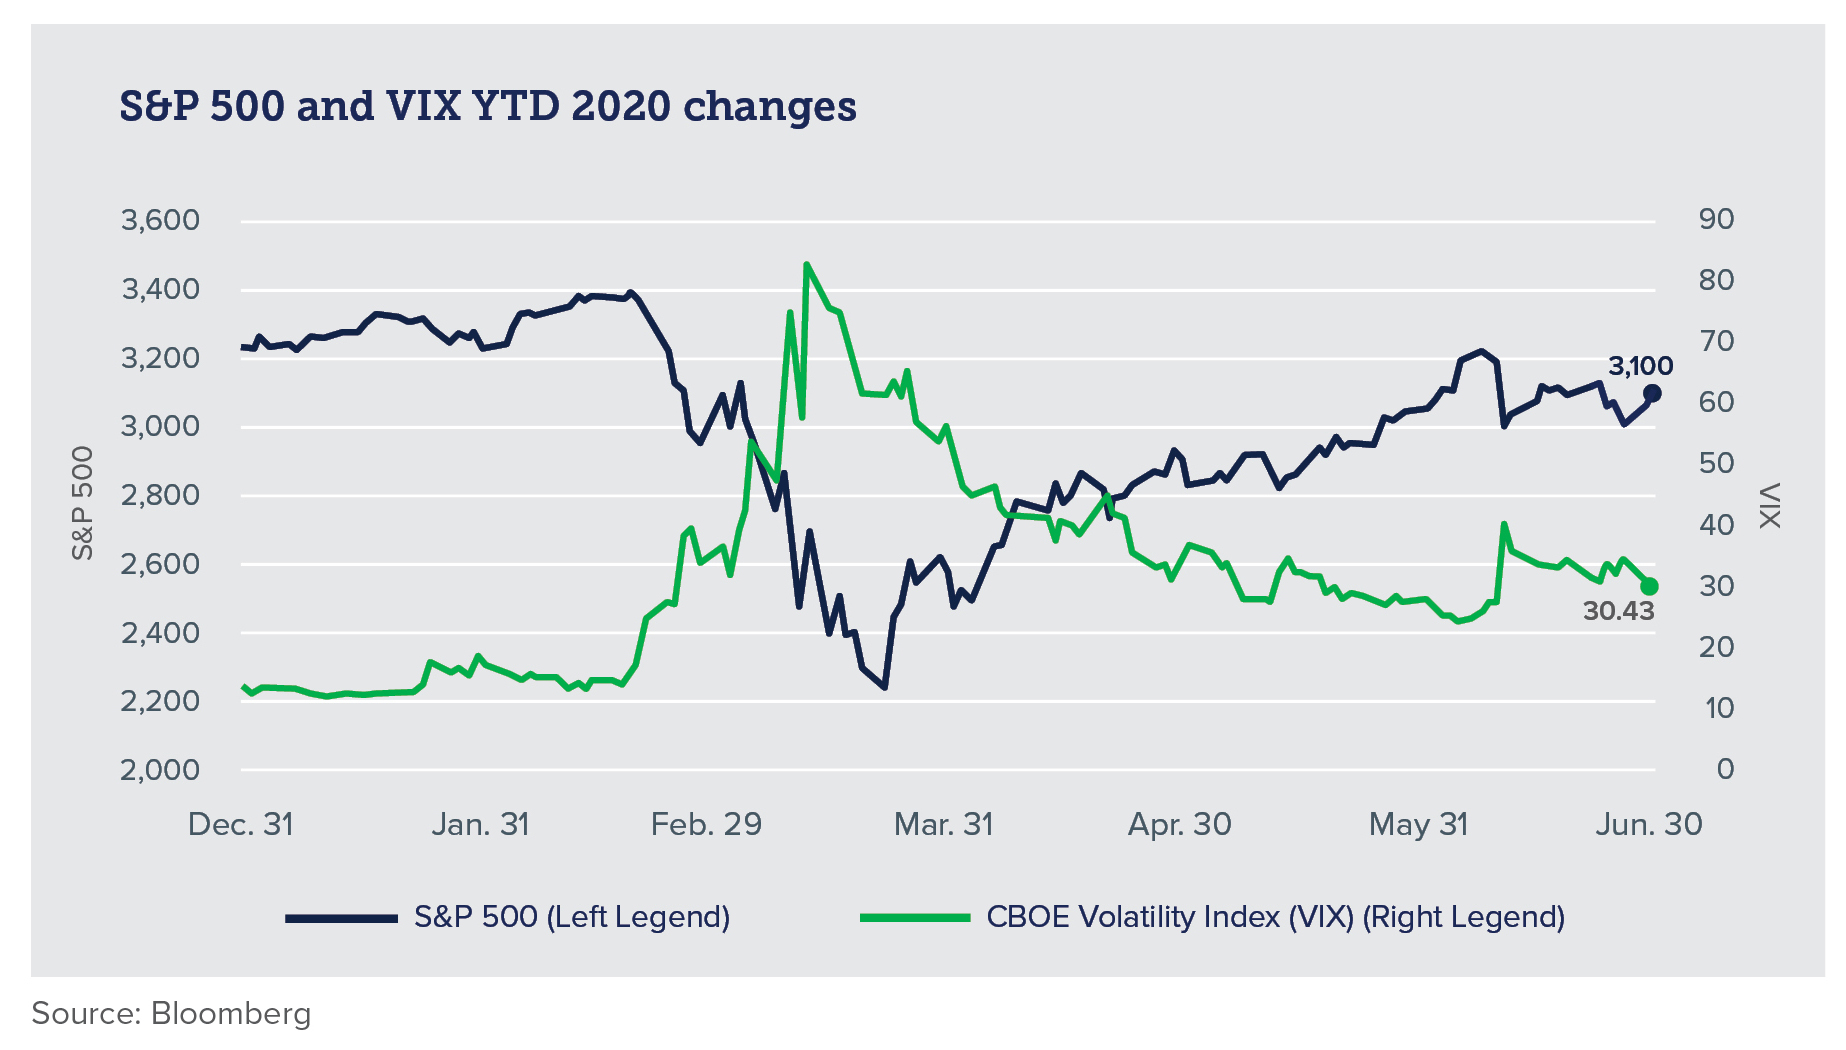 S&P 500 and VIX year to date 2020 changes chart